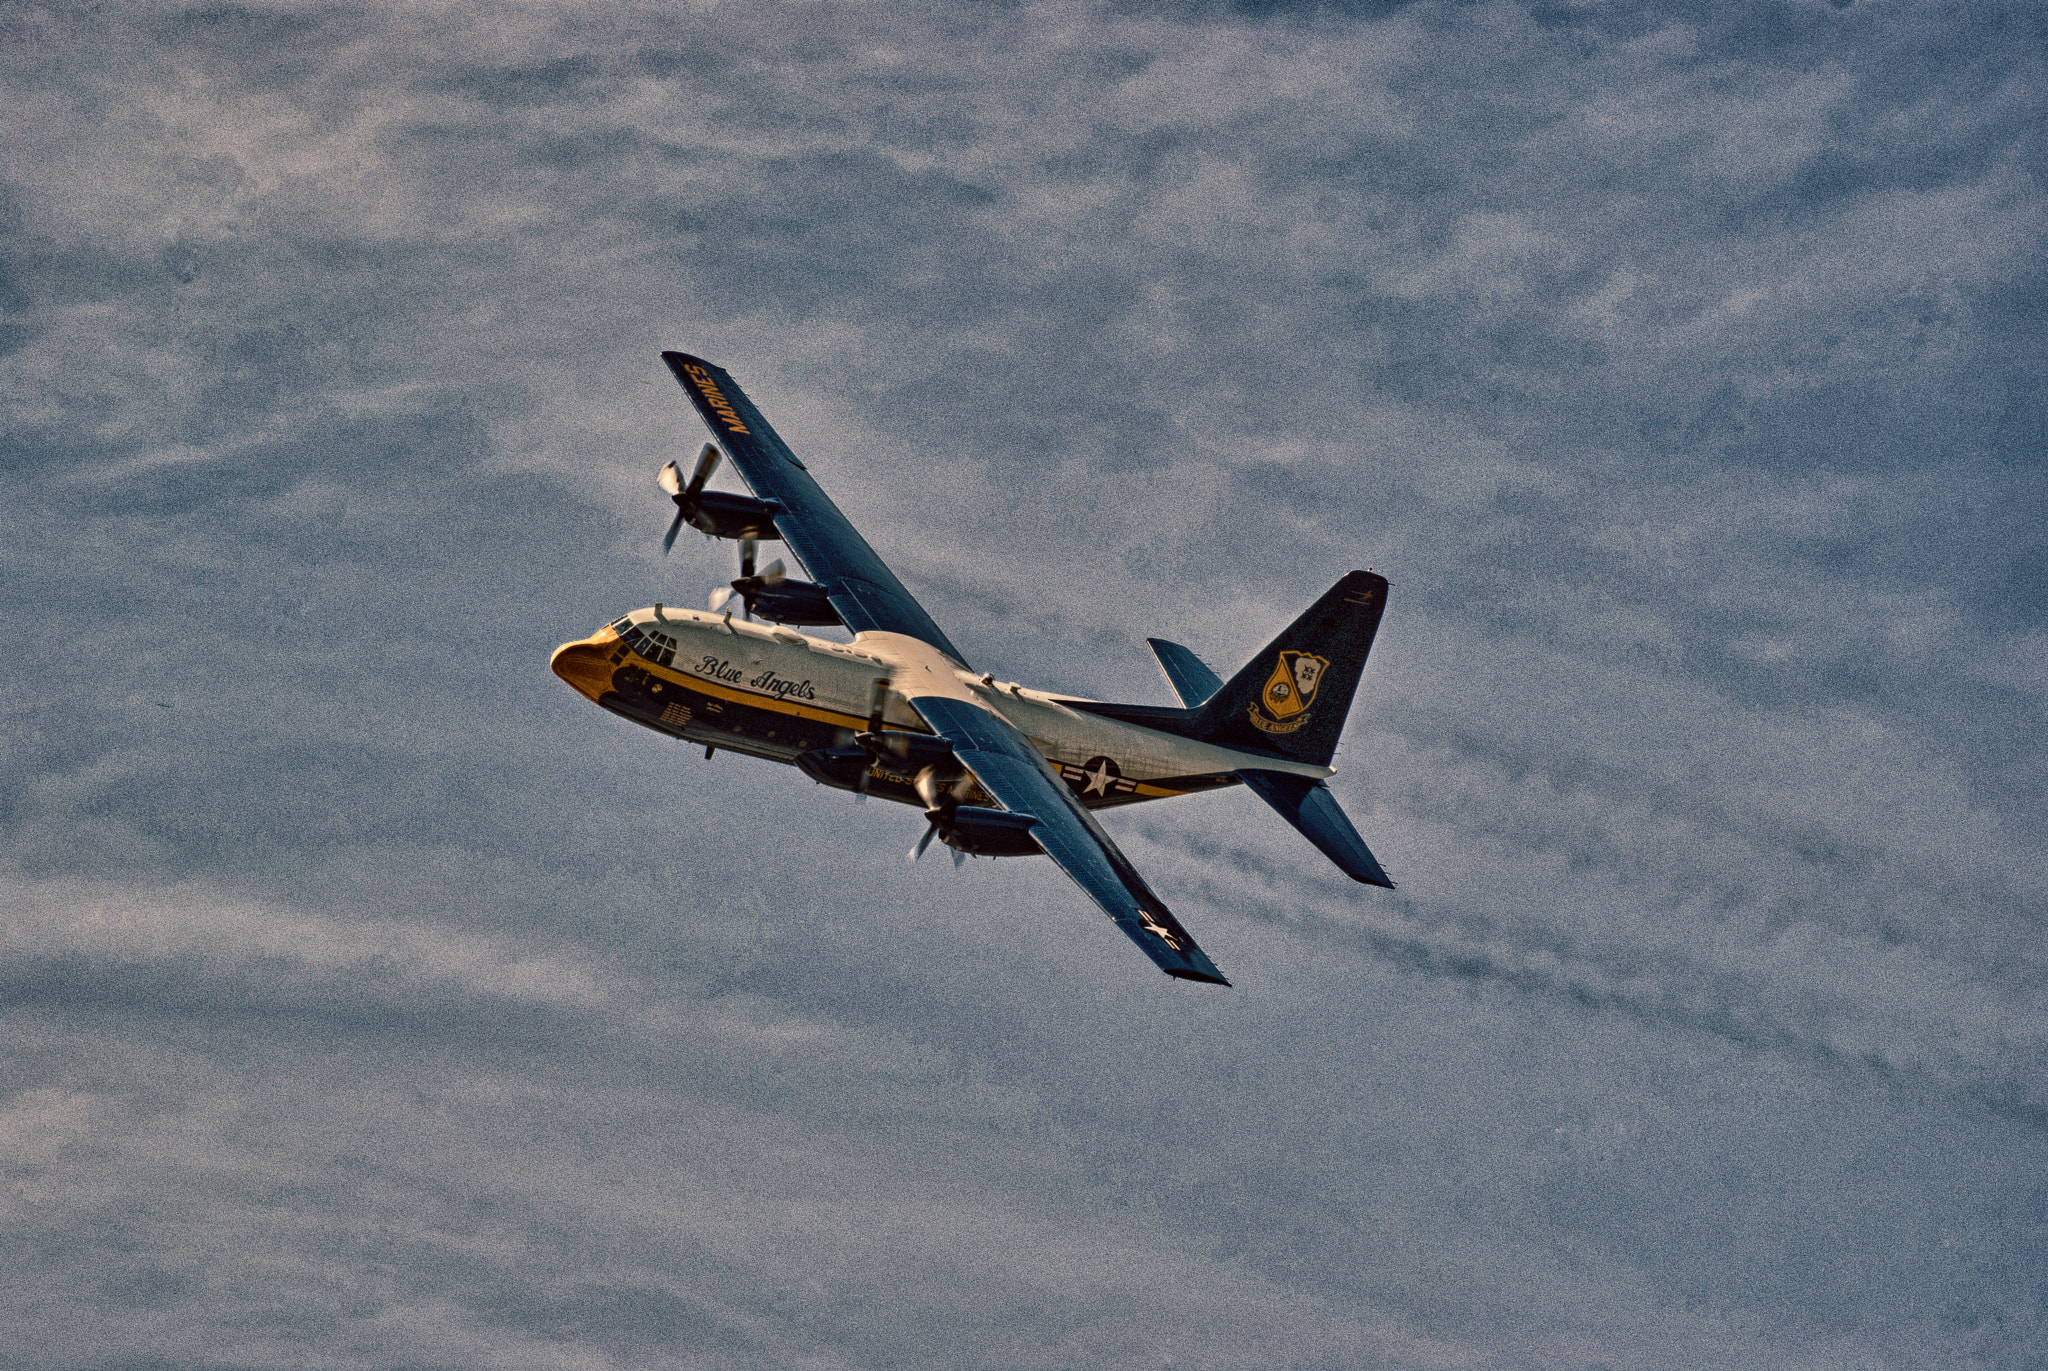 Sony Alpha DSLR-A330 sample photo. Blue angels "fat albert" at jrb fort worth photography